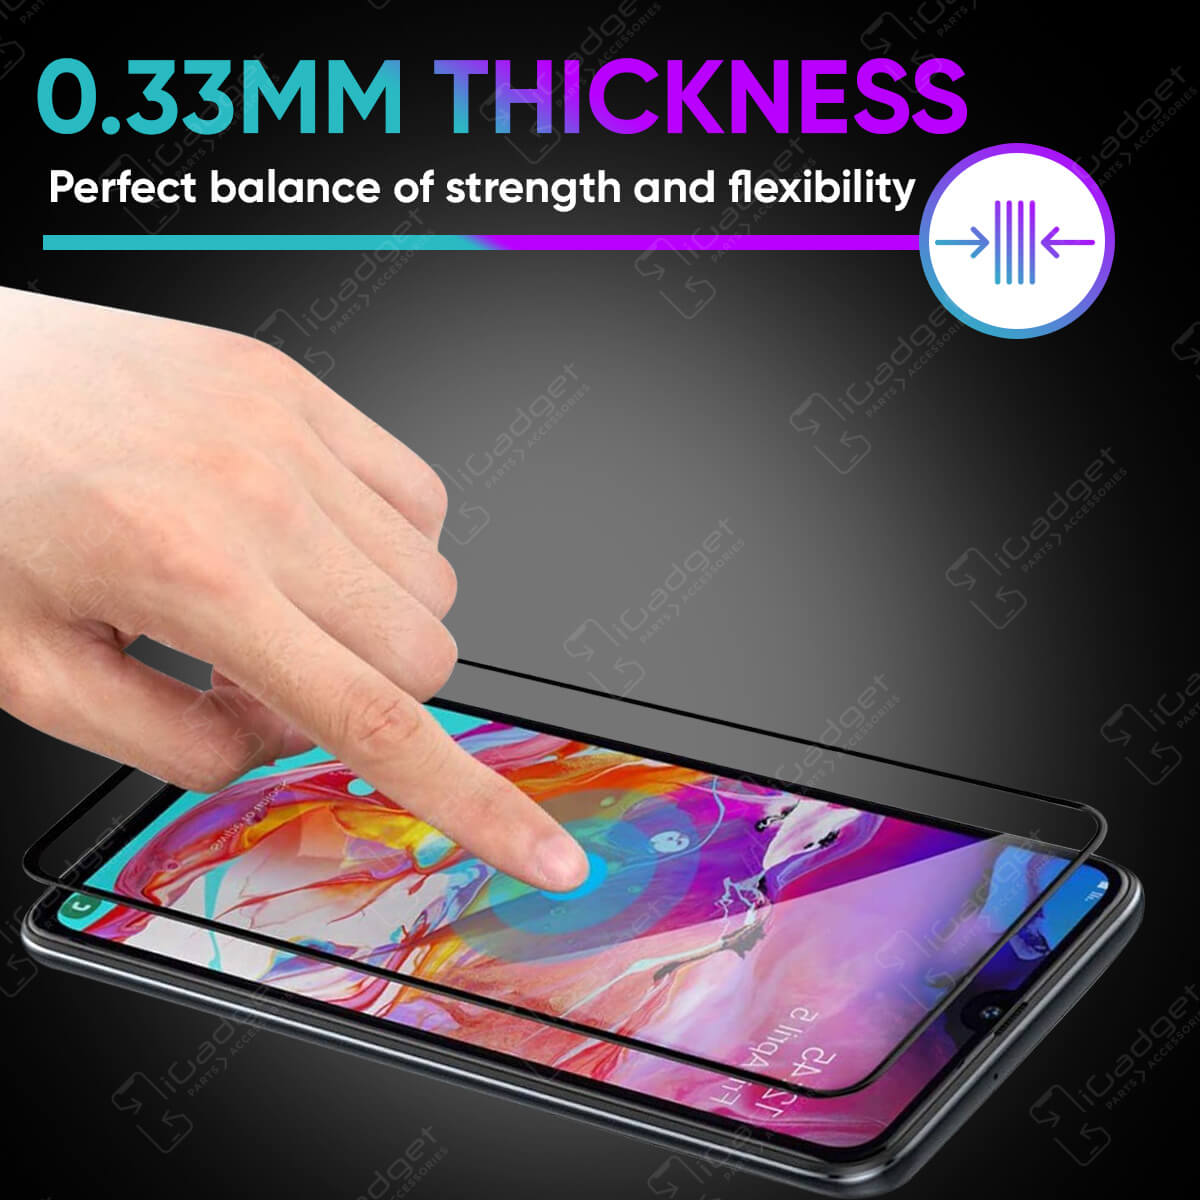 Samsung Galaxy A70/A70s (2019) Screen Protector | 3D Full Coverage Ultra Clear Tempered Glass